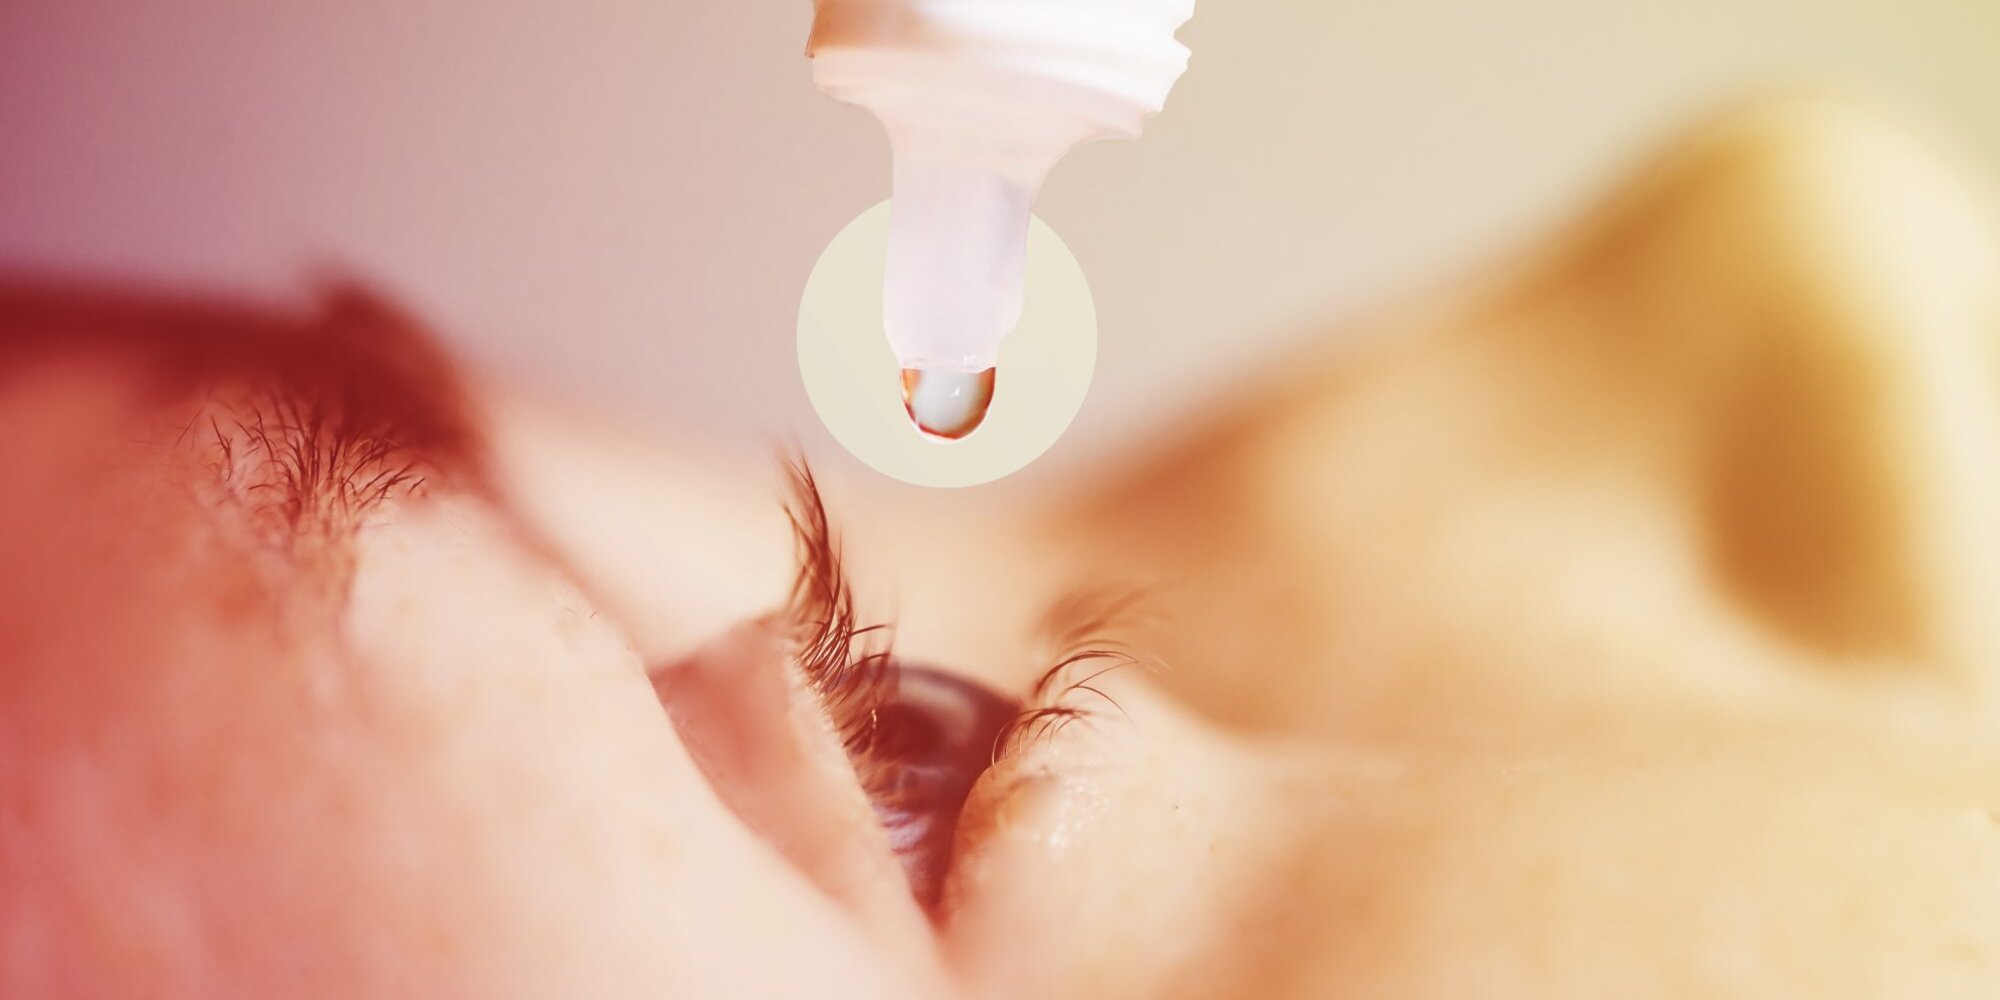 Glaucoma Eye Drops: 7 Options and What to Know About Each, According to Eye Doctors